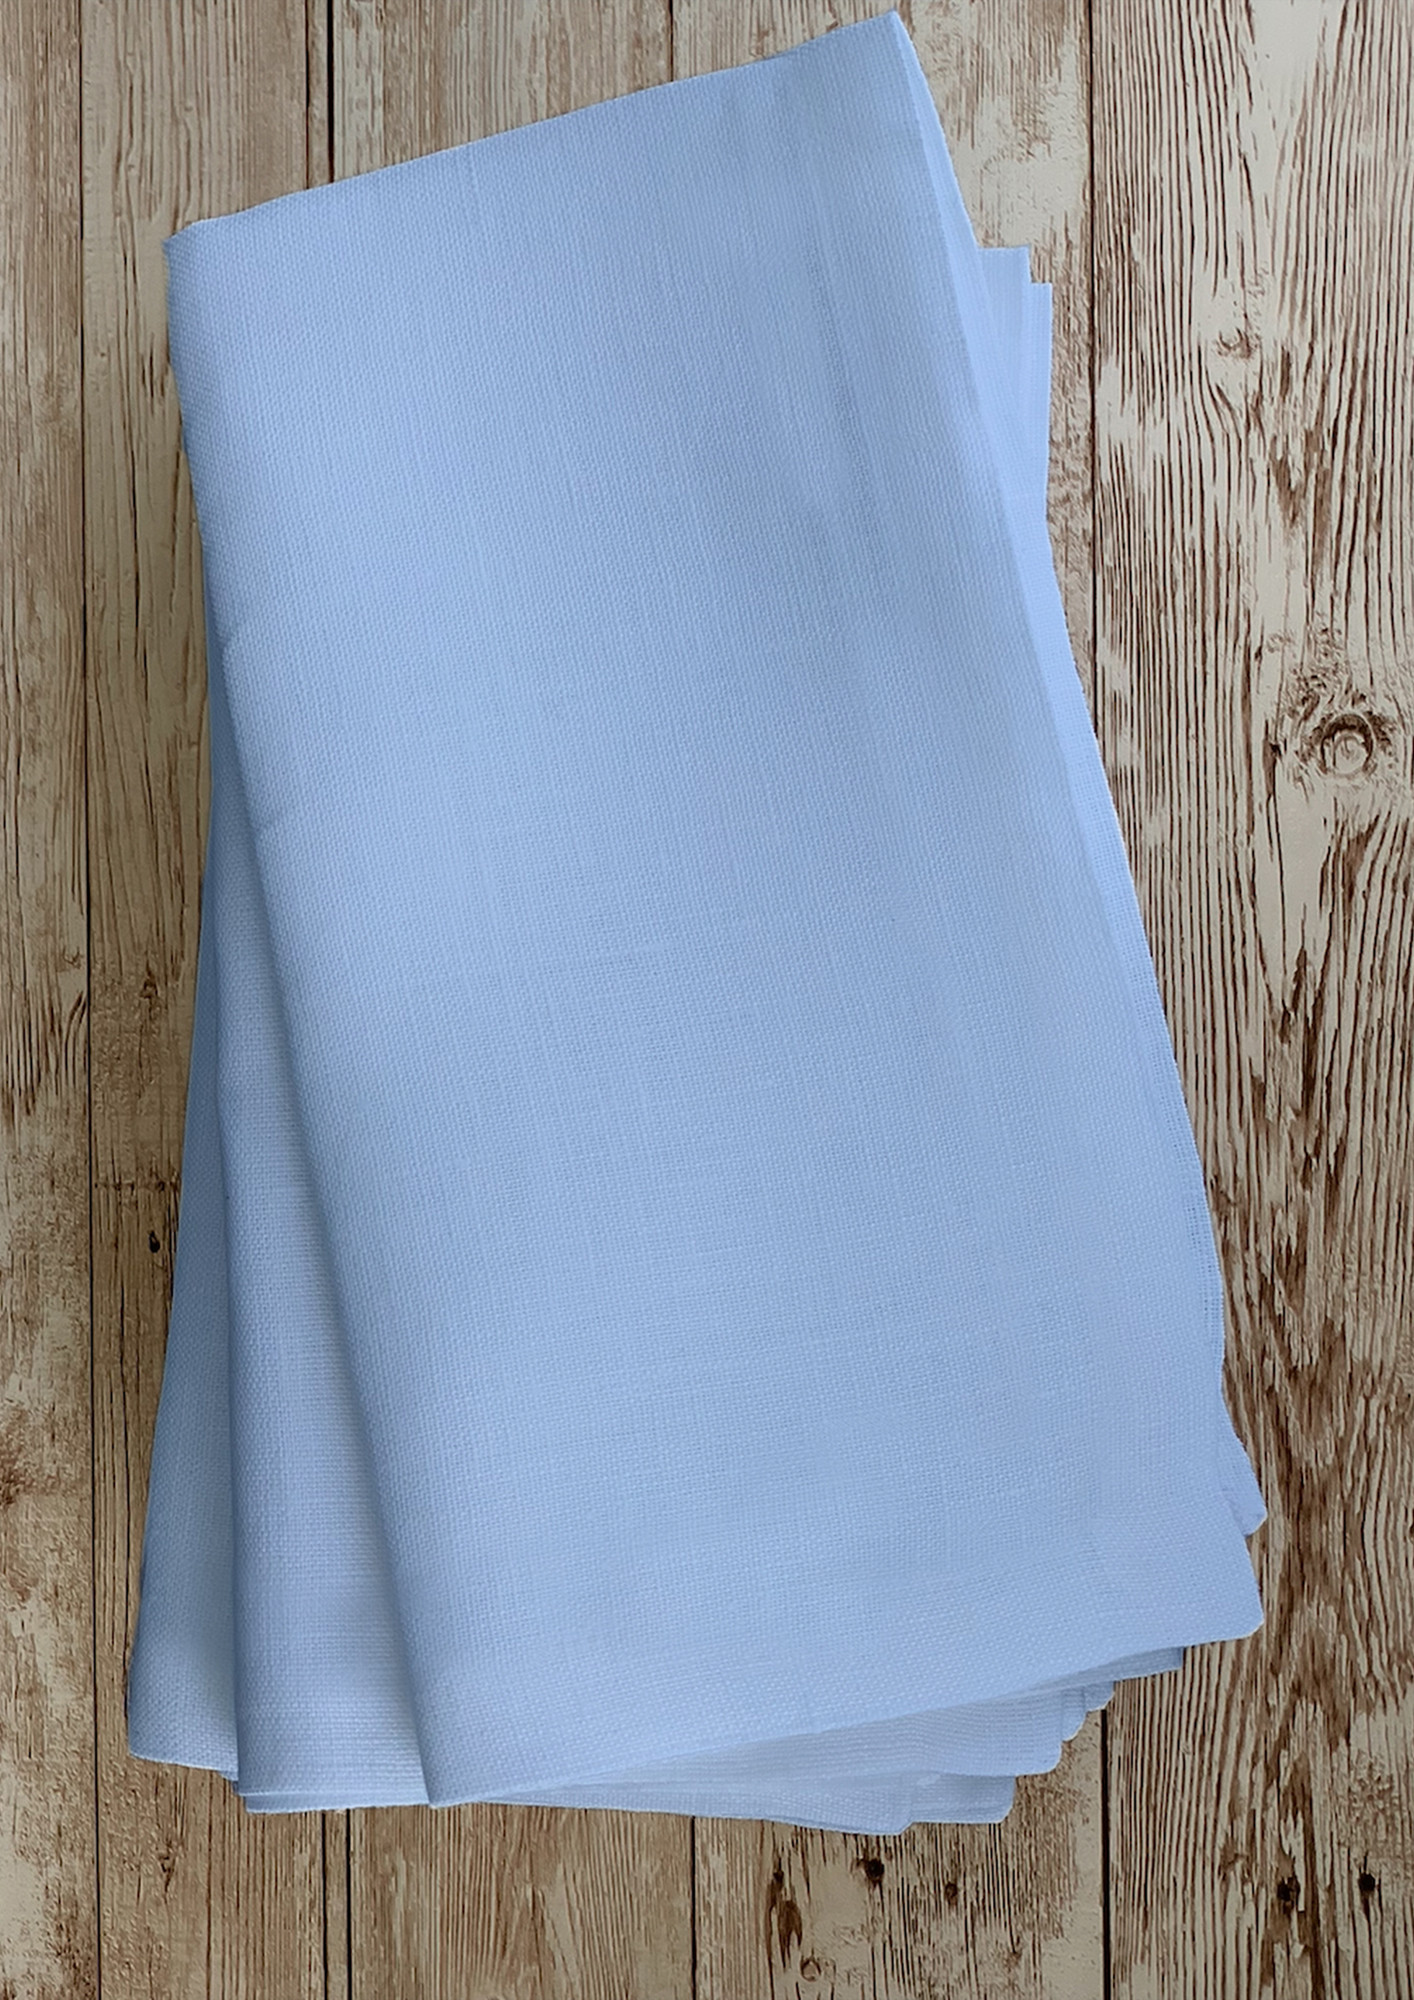 Buy Lushomes Cloth Napkin Set of 12 with Mitted Corners, Cotton Table  Dinner Linen, Eco-Friendly Cotton Fabric, Machine Washable for Dinner,  Restaurant & Banquet, 18x18 Inches (45x45 Cms), Light Blue for Women